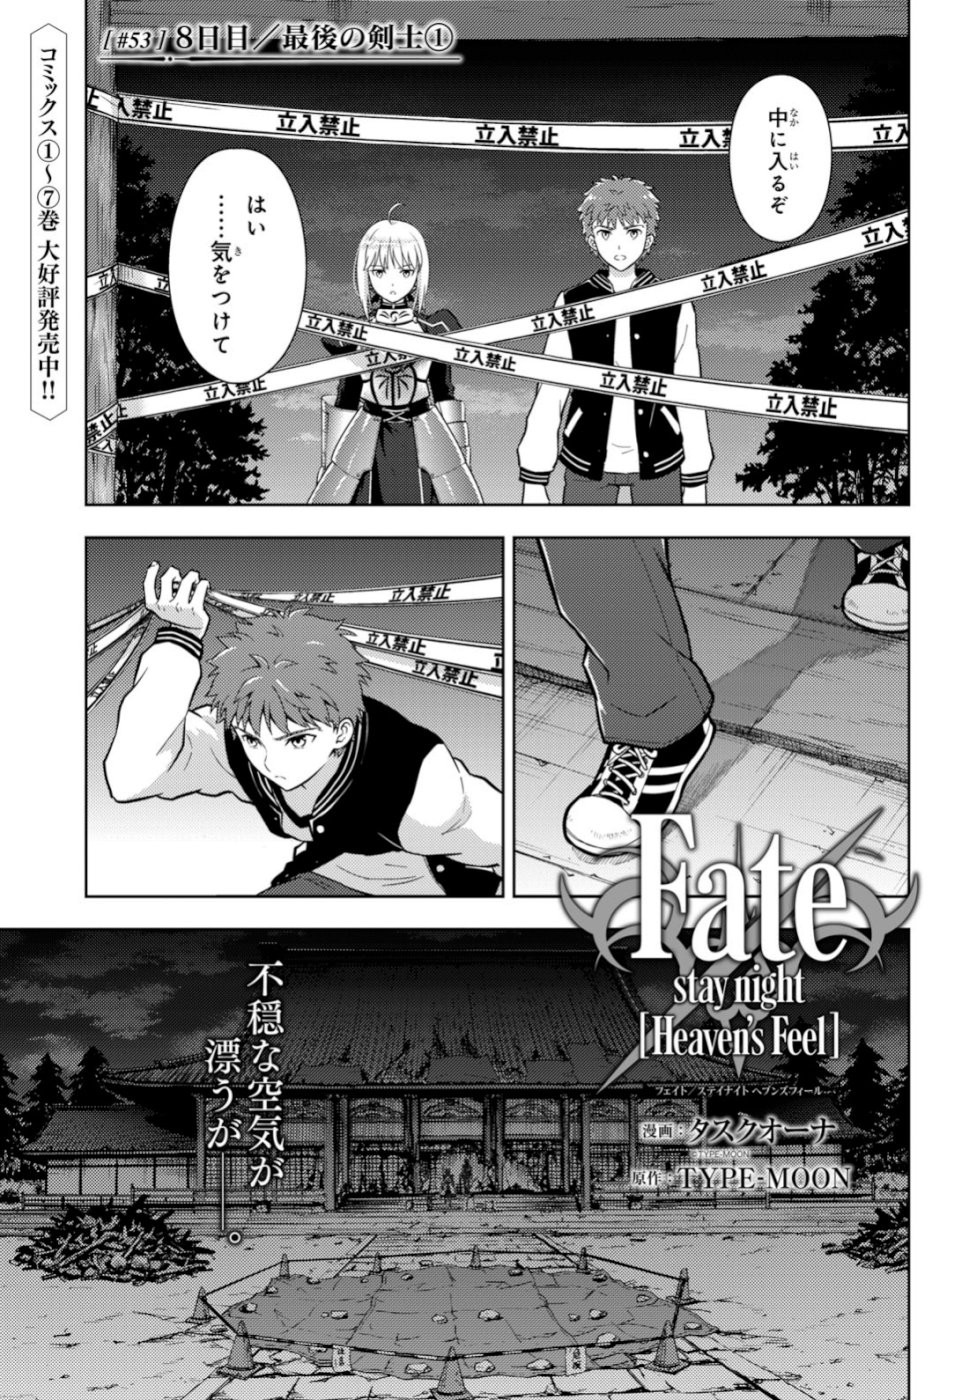 Fate/Stay night Heaven's Feel - Chapter 53 - Page 1